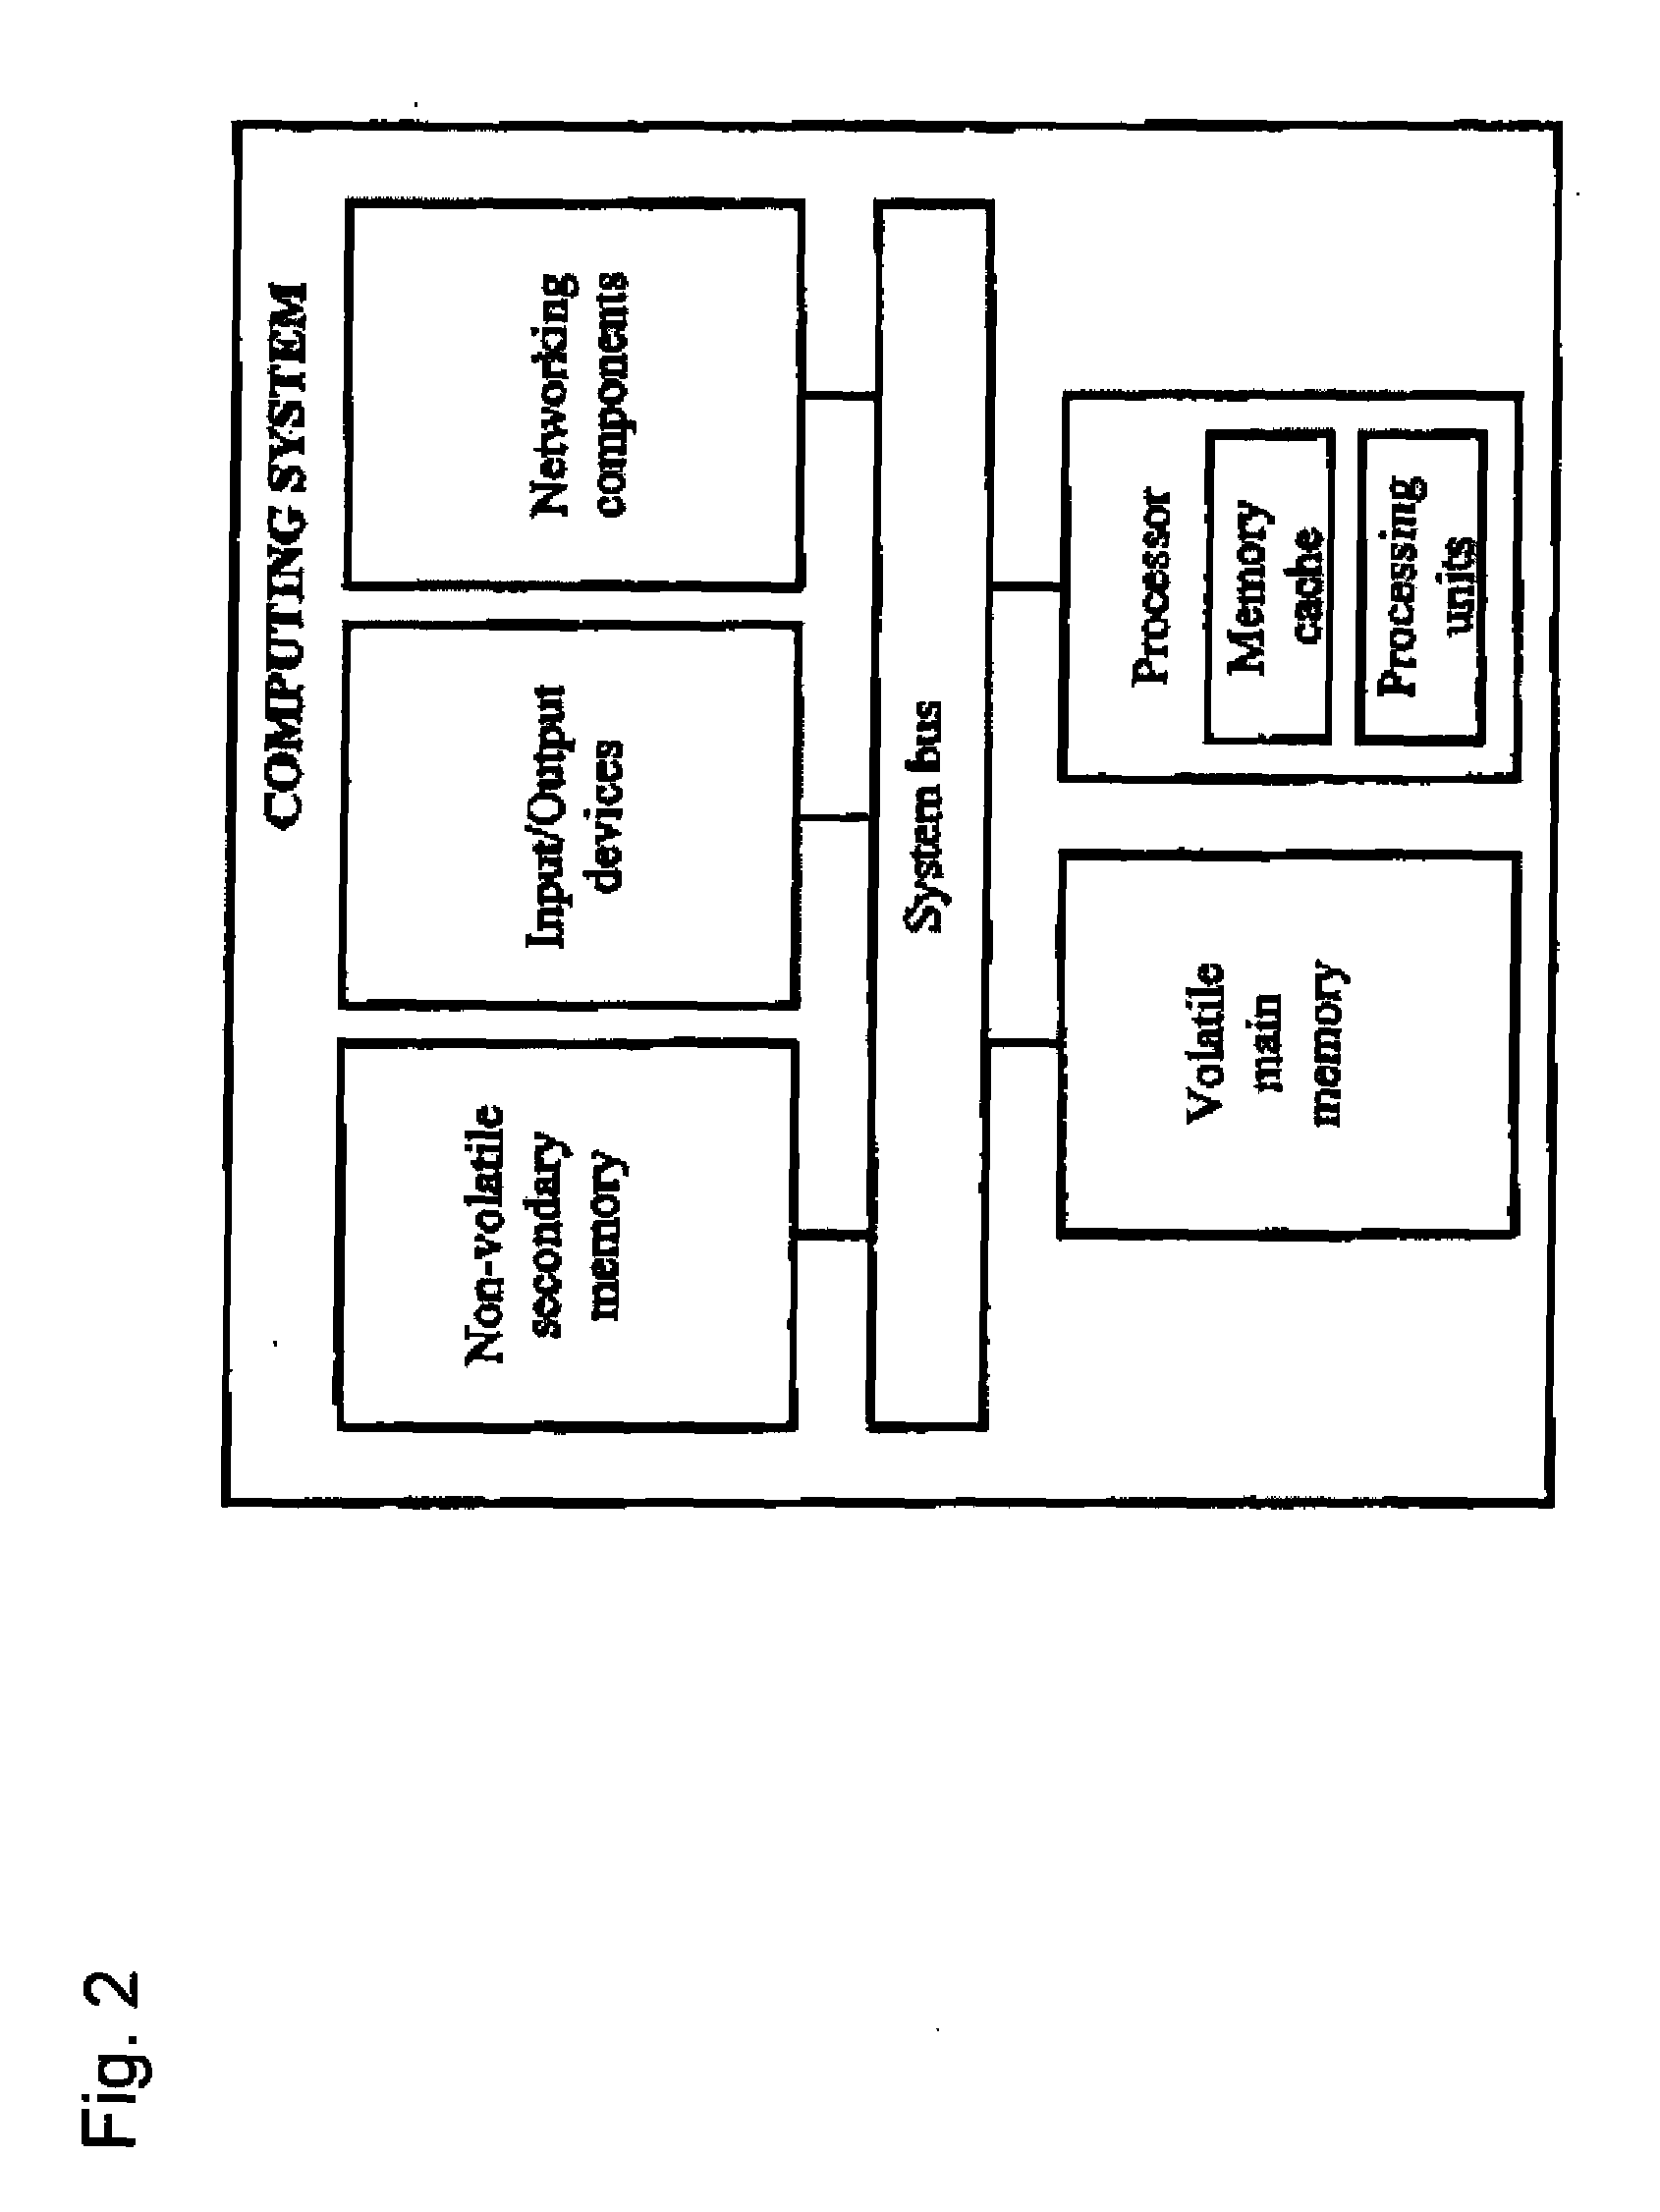 Systems and methods for providing value-based insurance design and benefits